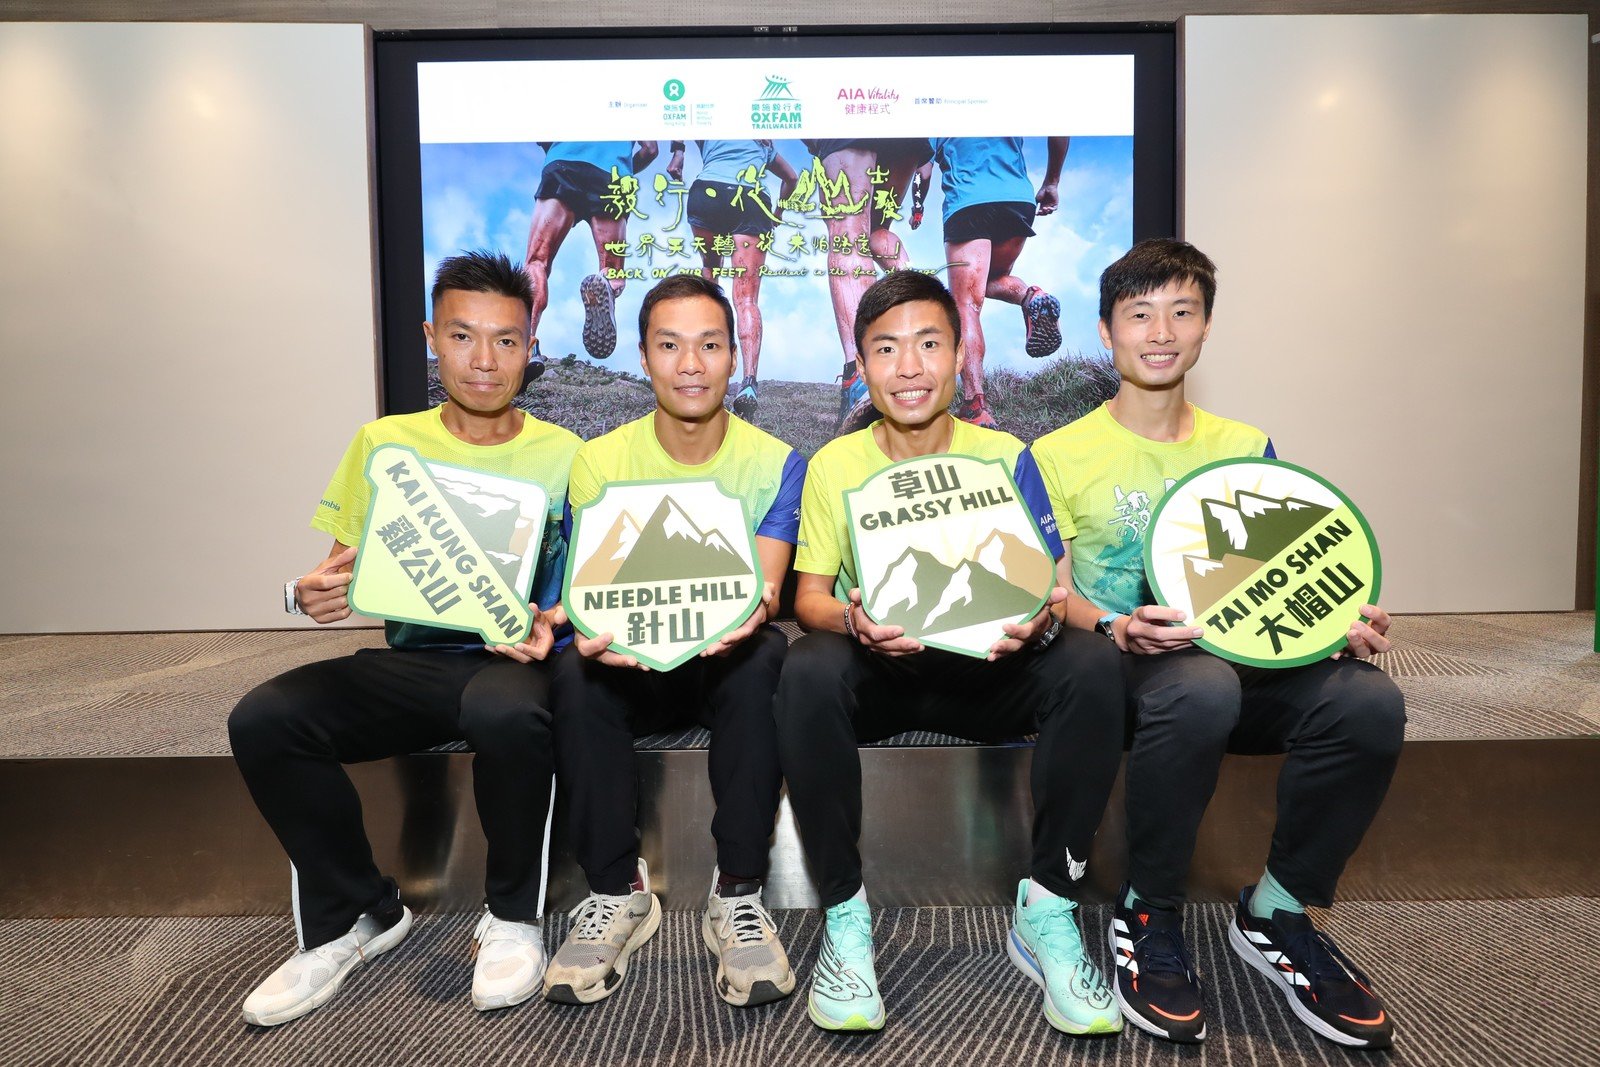 Top trail runner Wong Ho Chung, rising star Tsang Fuk Cheung, Joseph Yeung Chi Shing and Woody Wu Man Tsun will take part in Oxfam Trailwalker 2022. Their goal is to complete the 100 km in 11.5 hours.